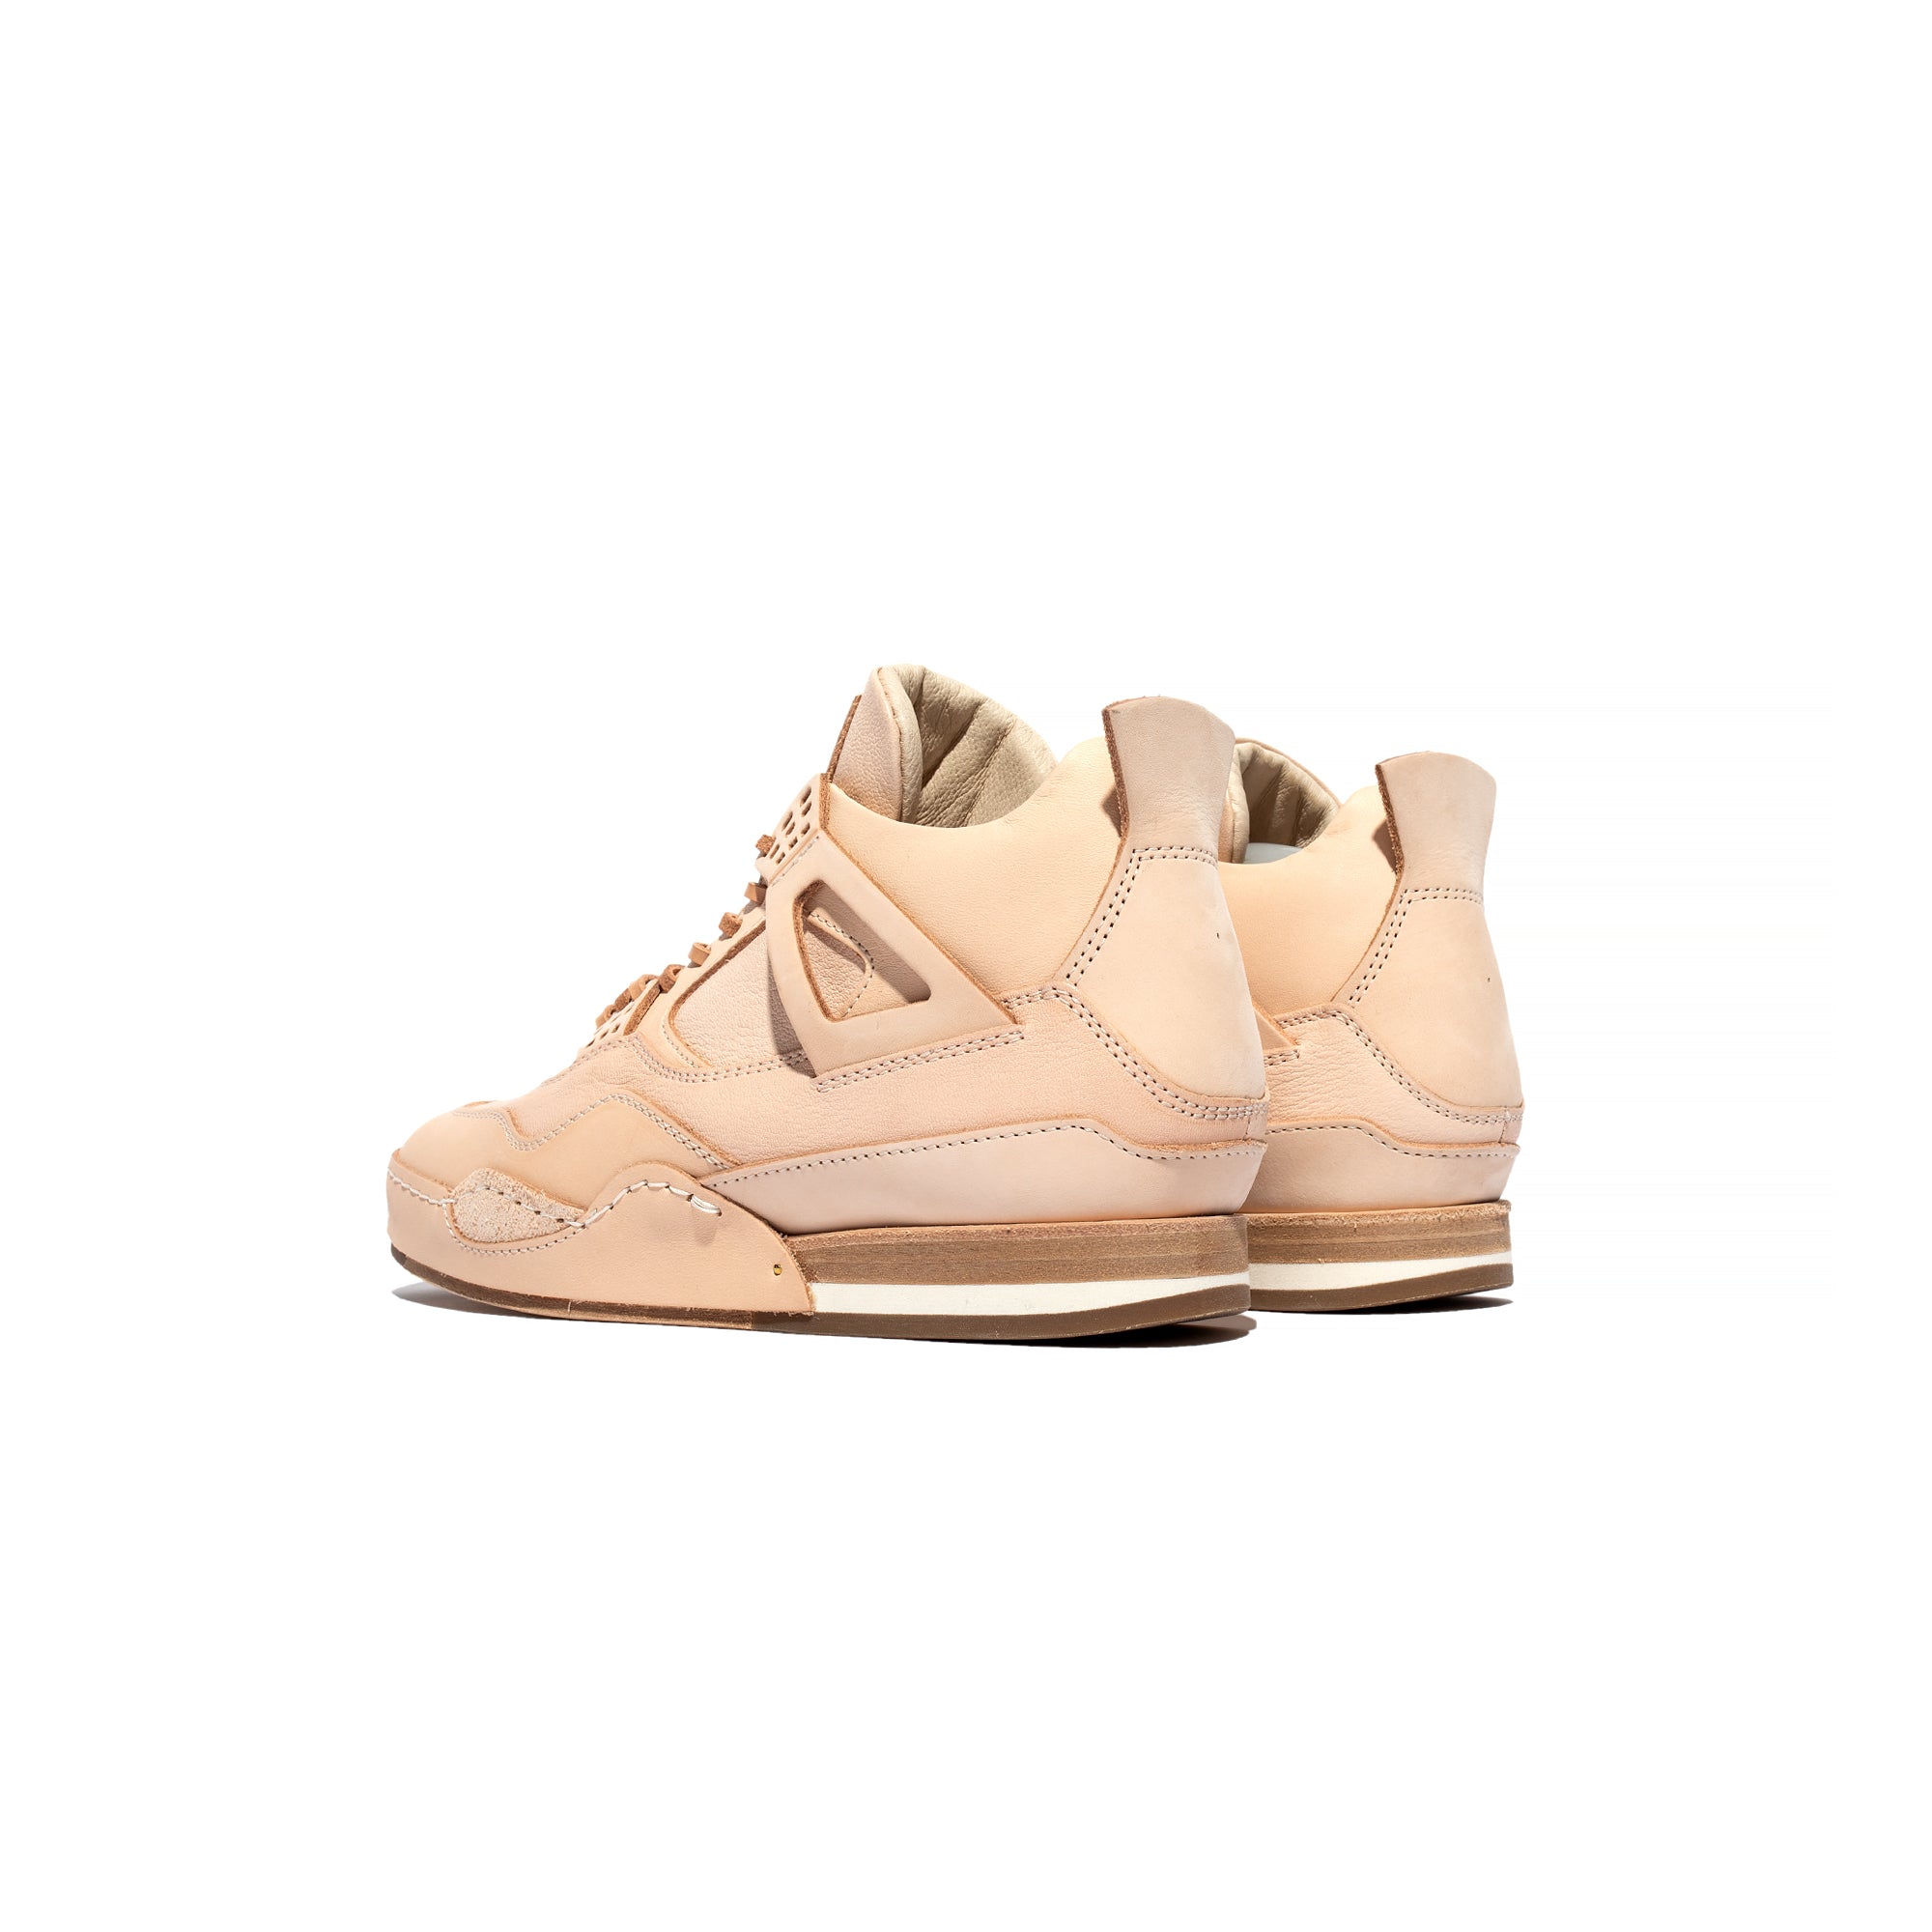 Hender Scheme Mens Manual Industrial Products 10 Shoes